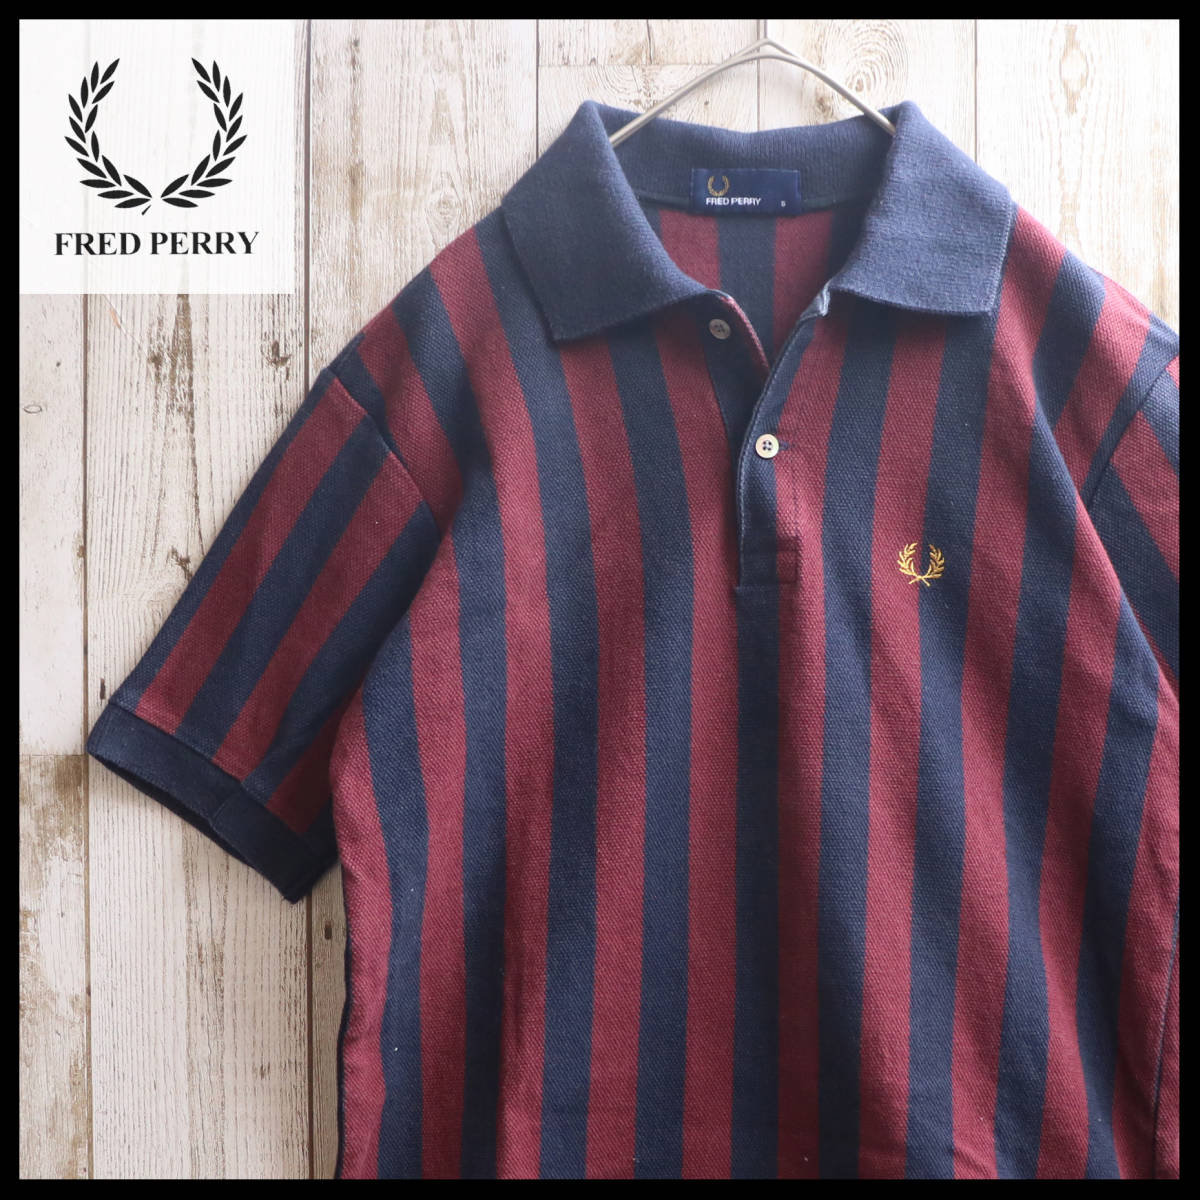 [USED] Fred Perry FREDPERRY polo-shirt stripe pattern yellowtail tissue Oi England LONDON old clothes S size * free shipping *